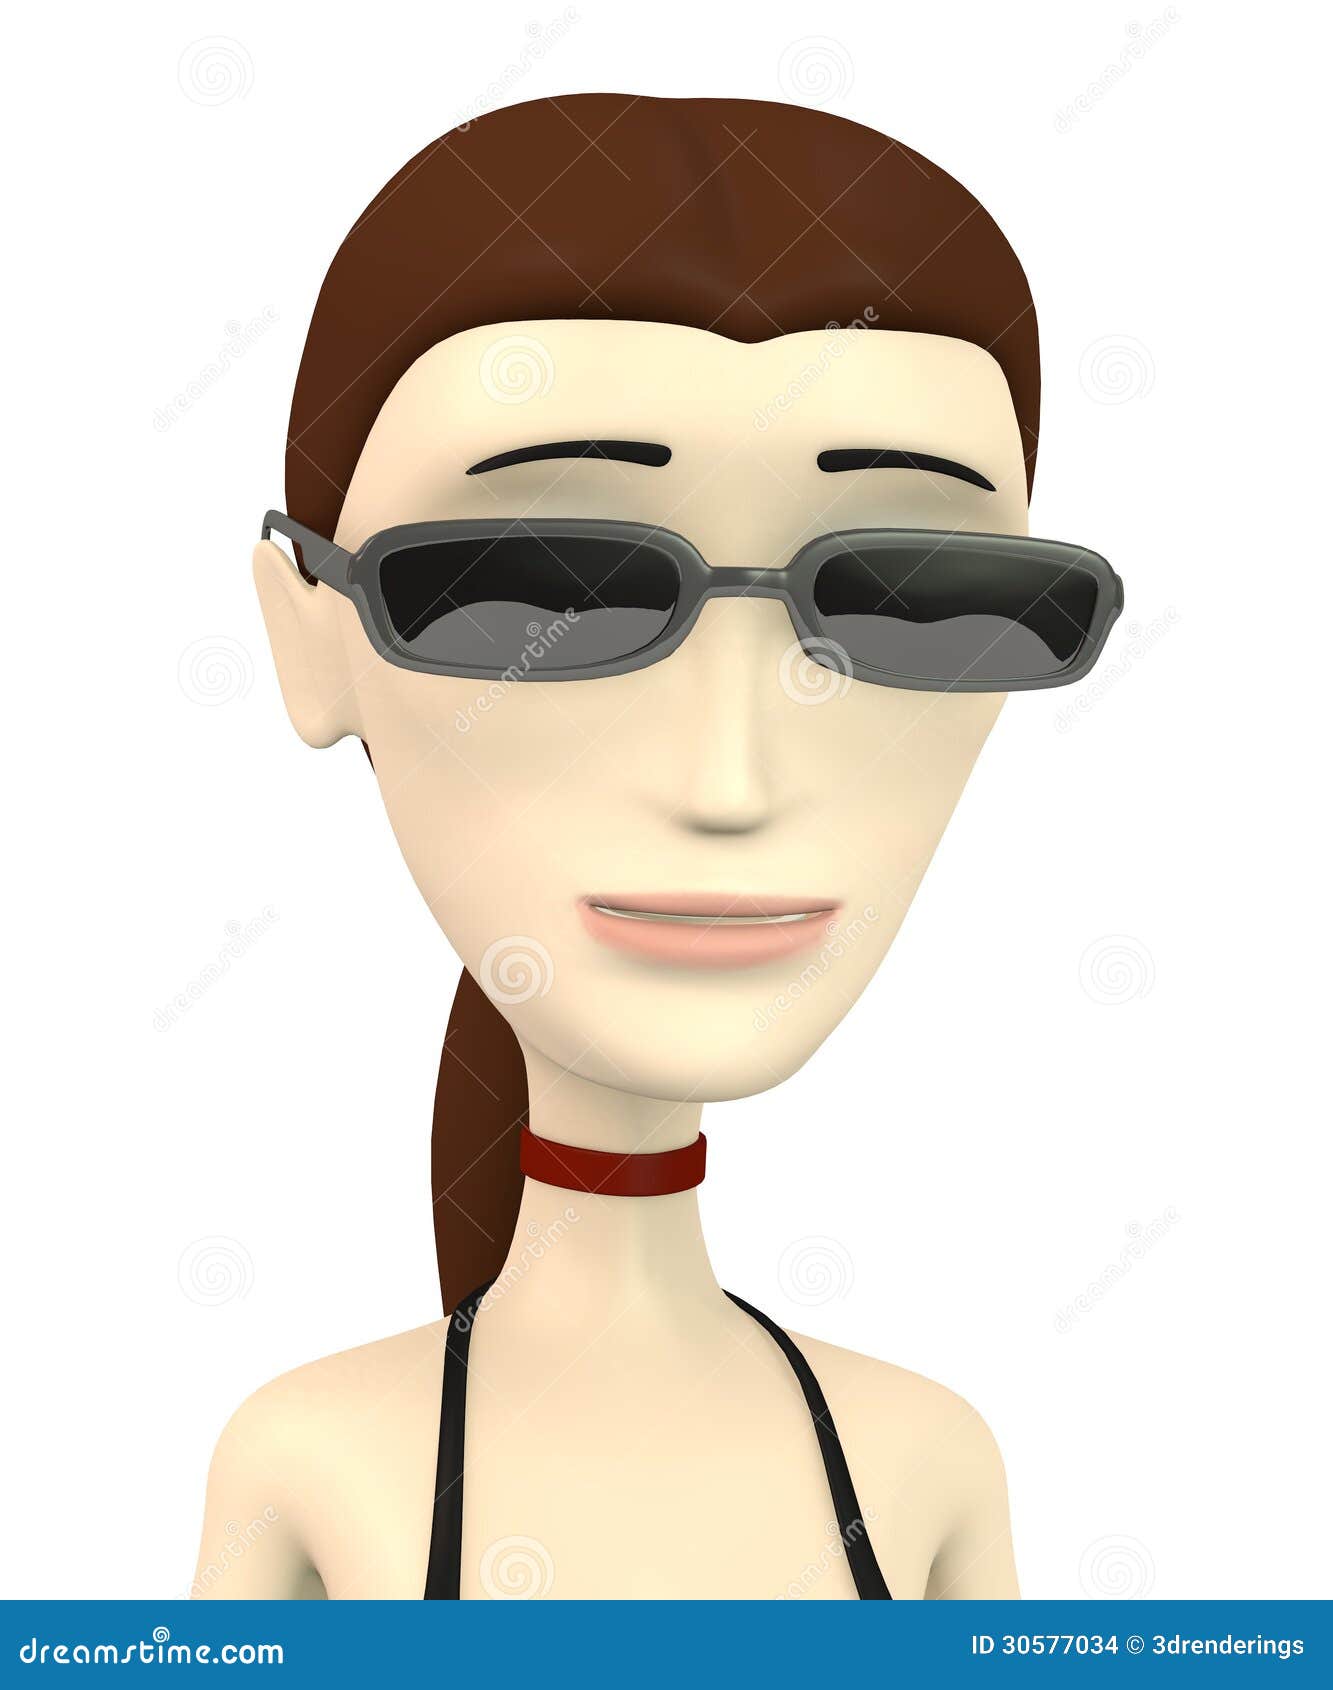 Cartoon Girl With Glasses Stock Images - Image: 30577034